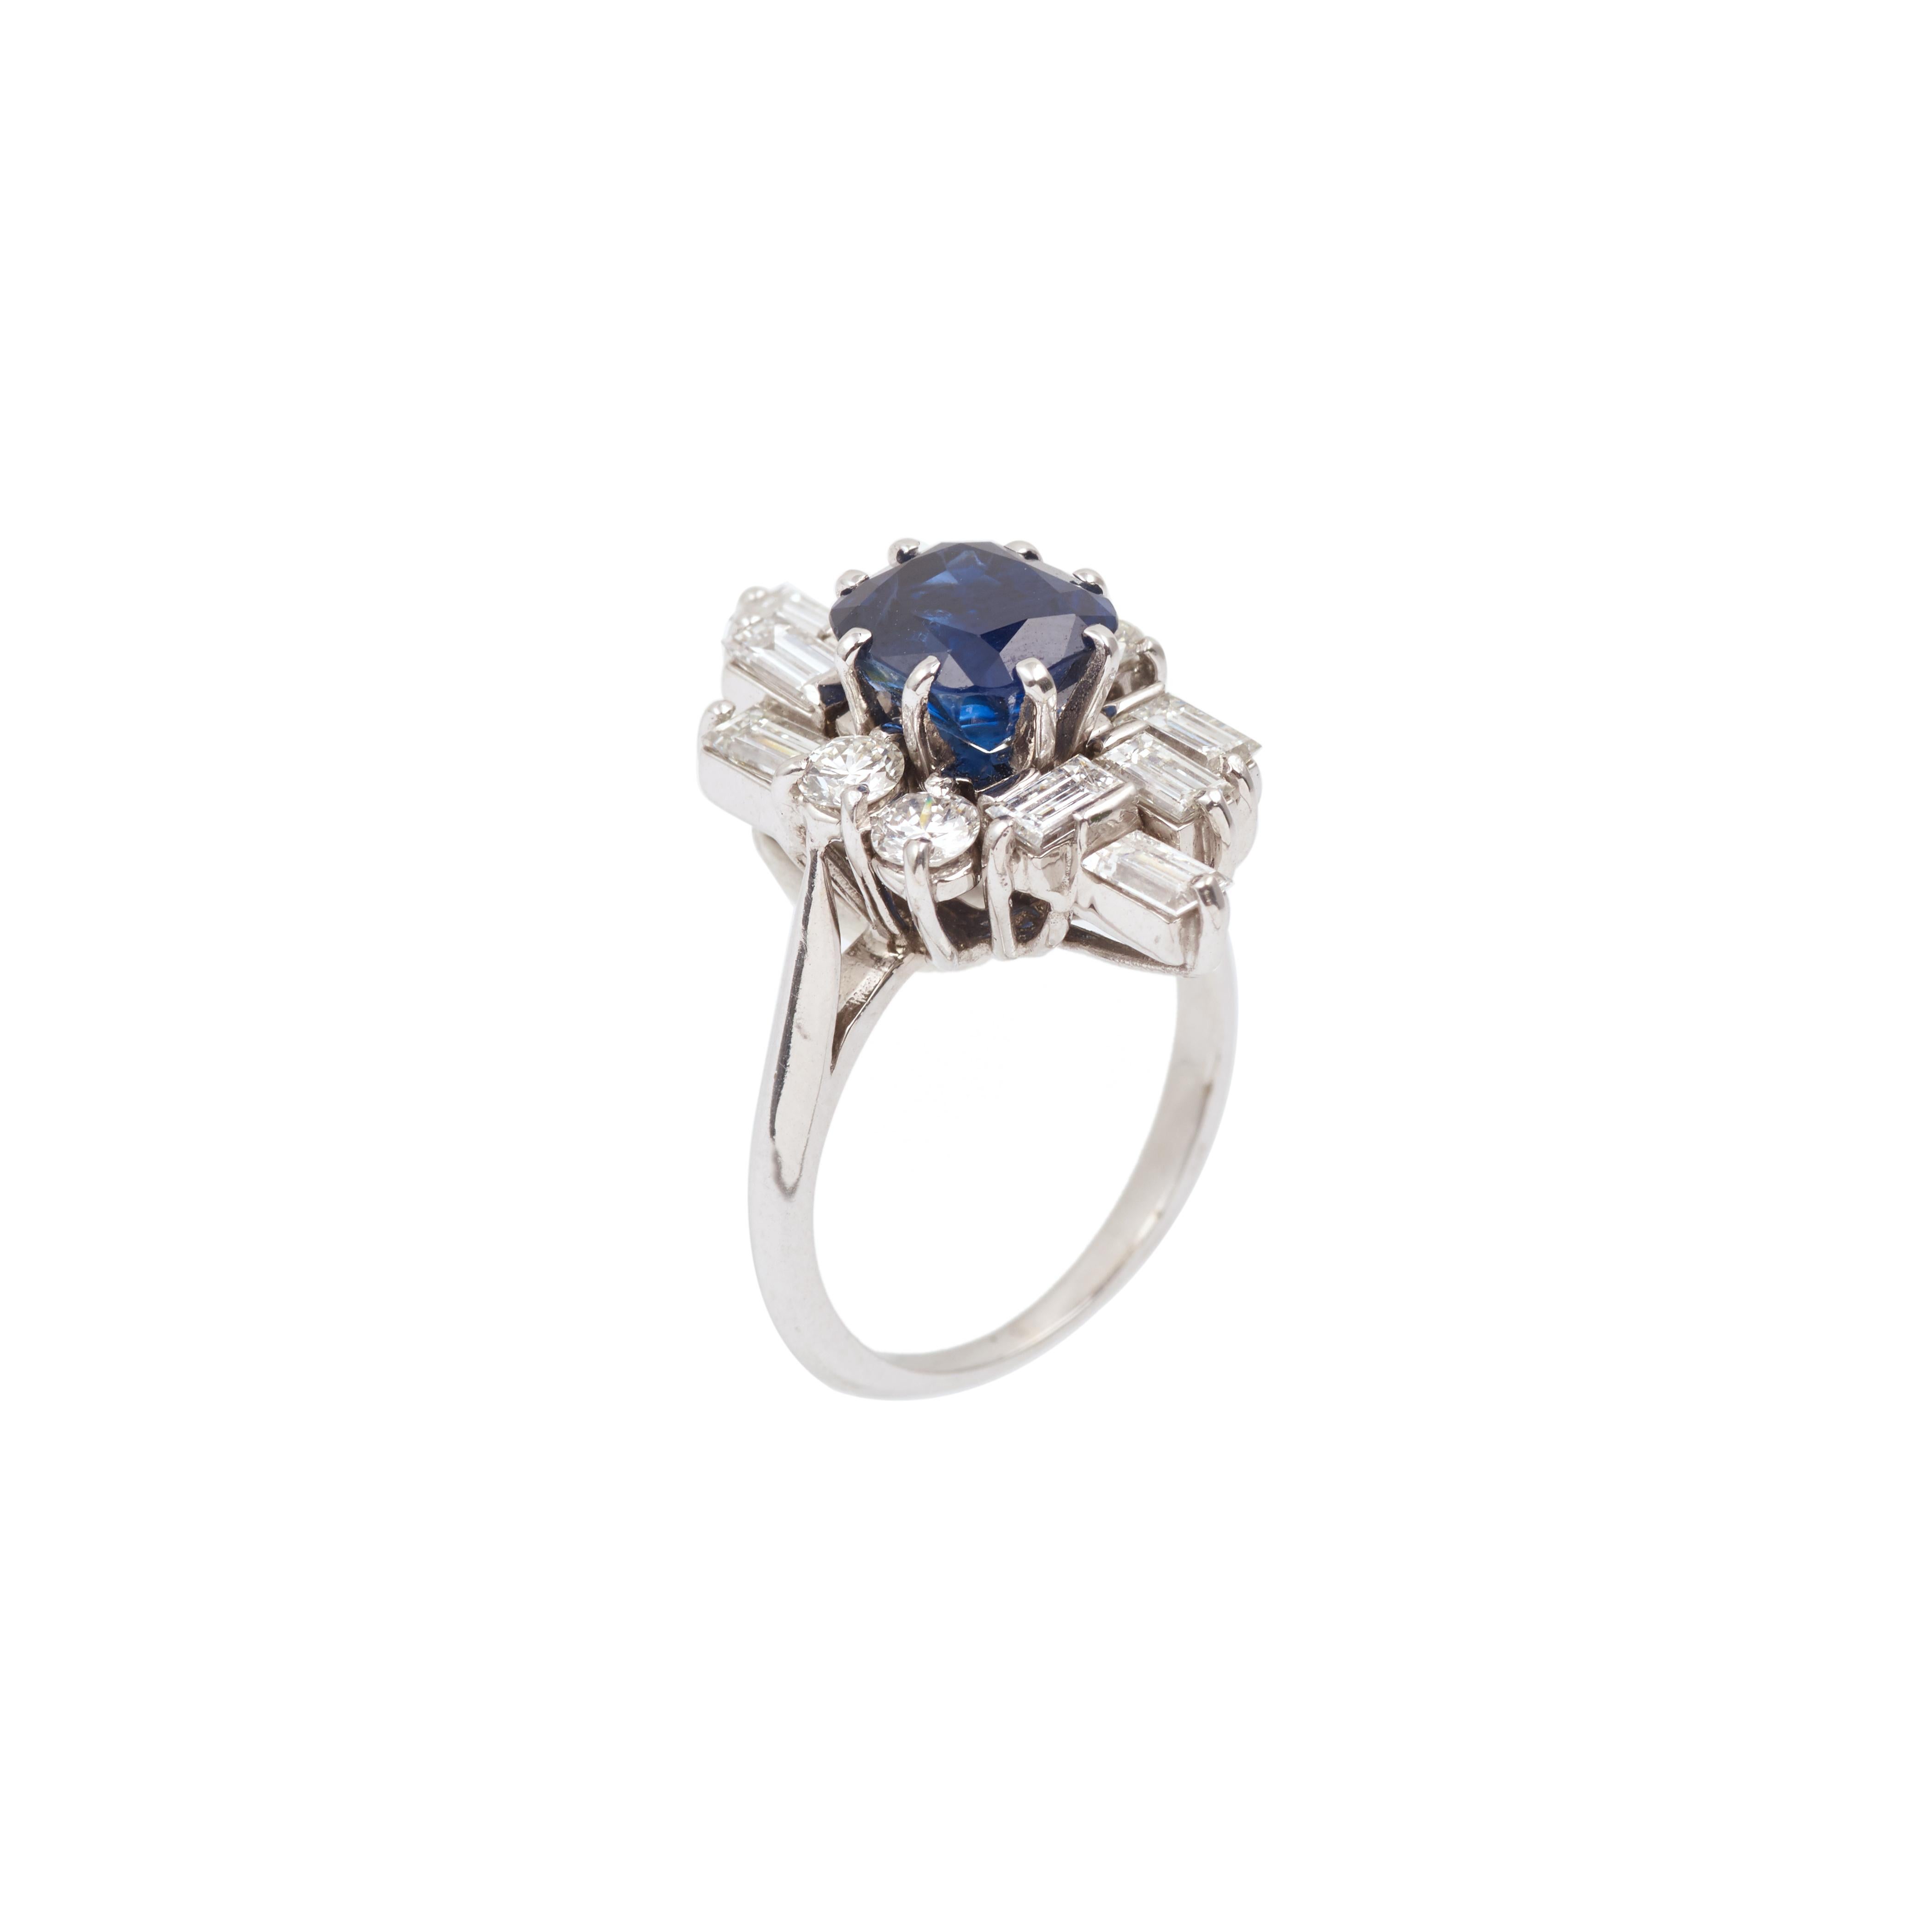 Beautiful pompadour ring set with a cushion cut sapphire of approximately 1.80 carats.

The central stone is surrounded by eight baguette-cut diamonds and four brilliant-cut diamonds.

Total weight of diamonds: approx 0.80 carats
Size of the ring :